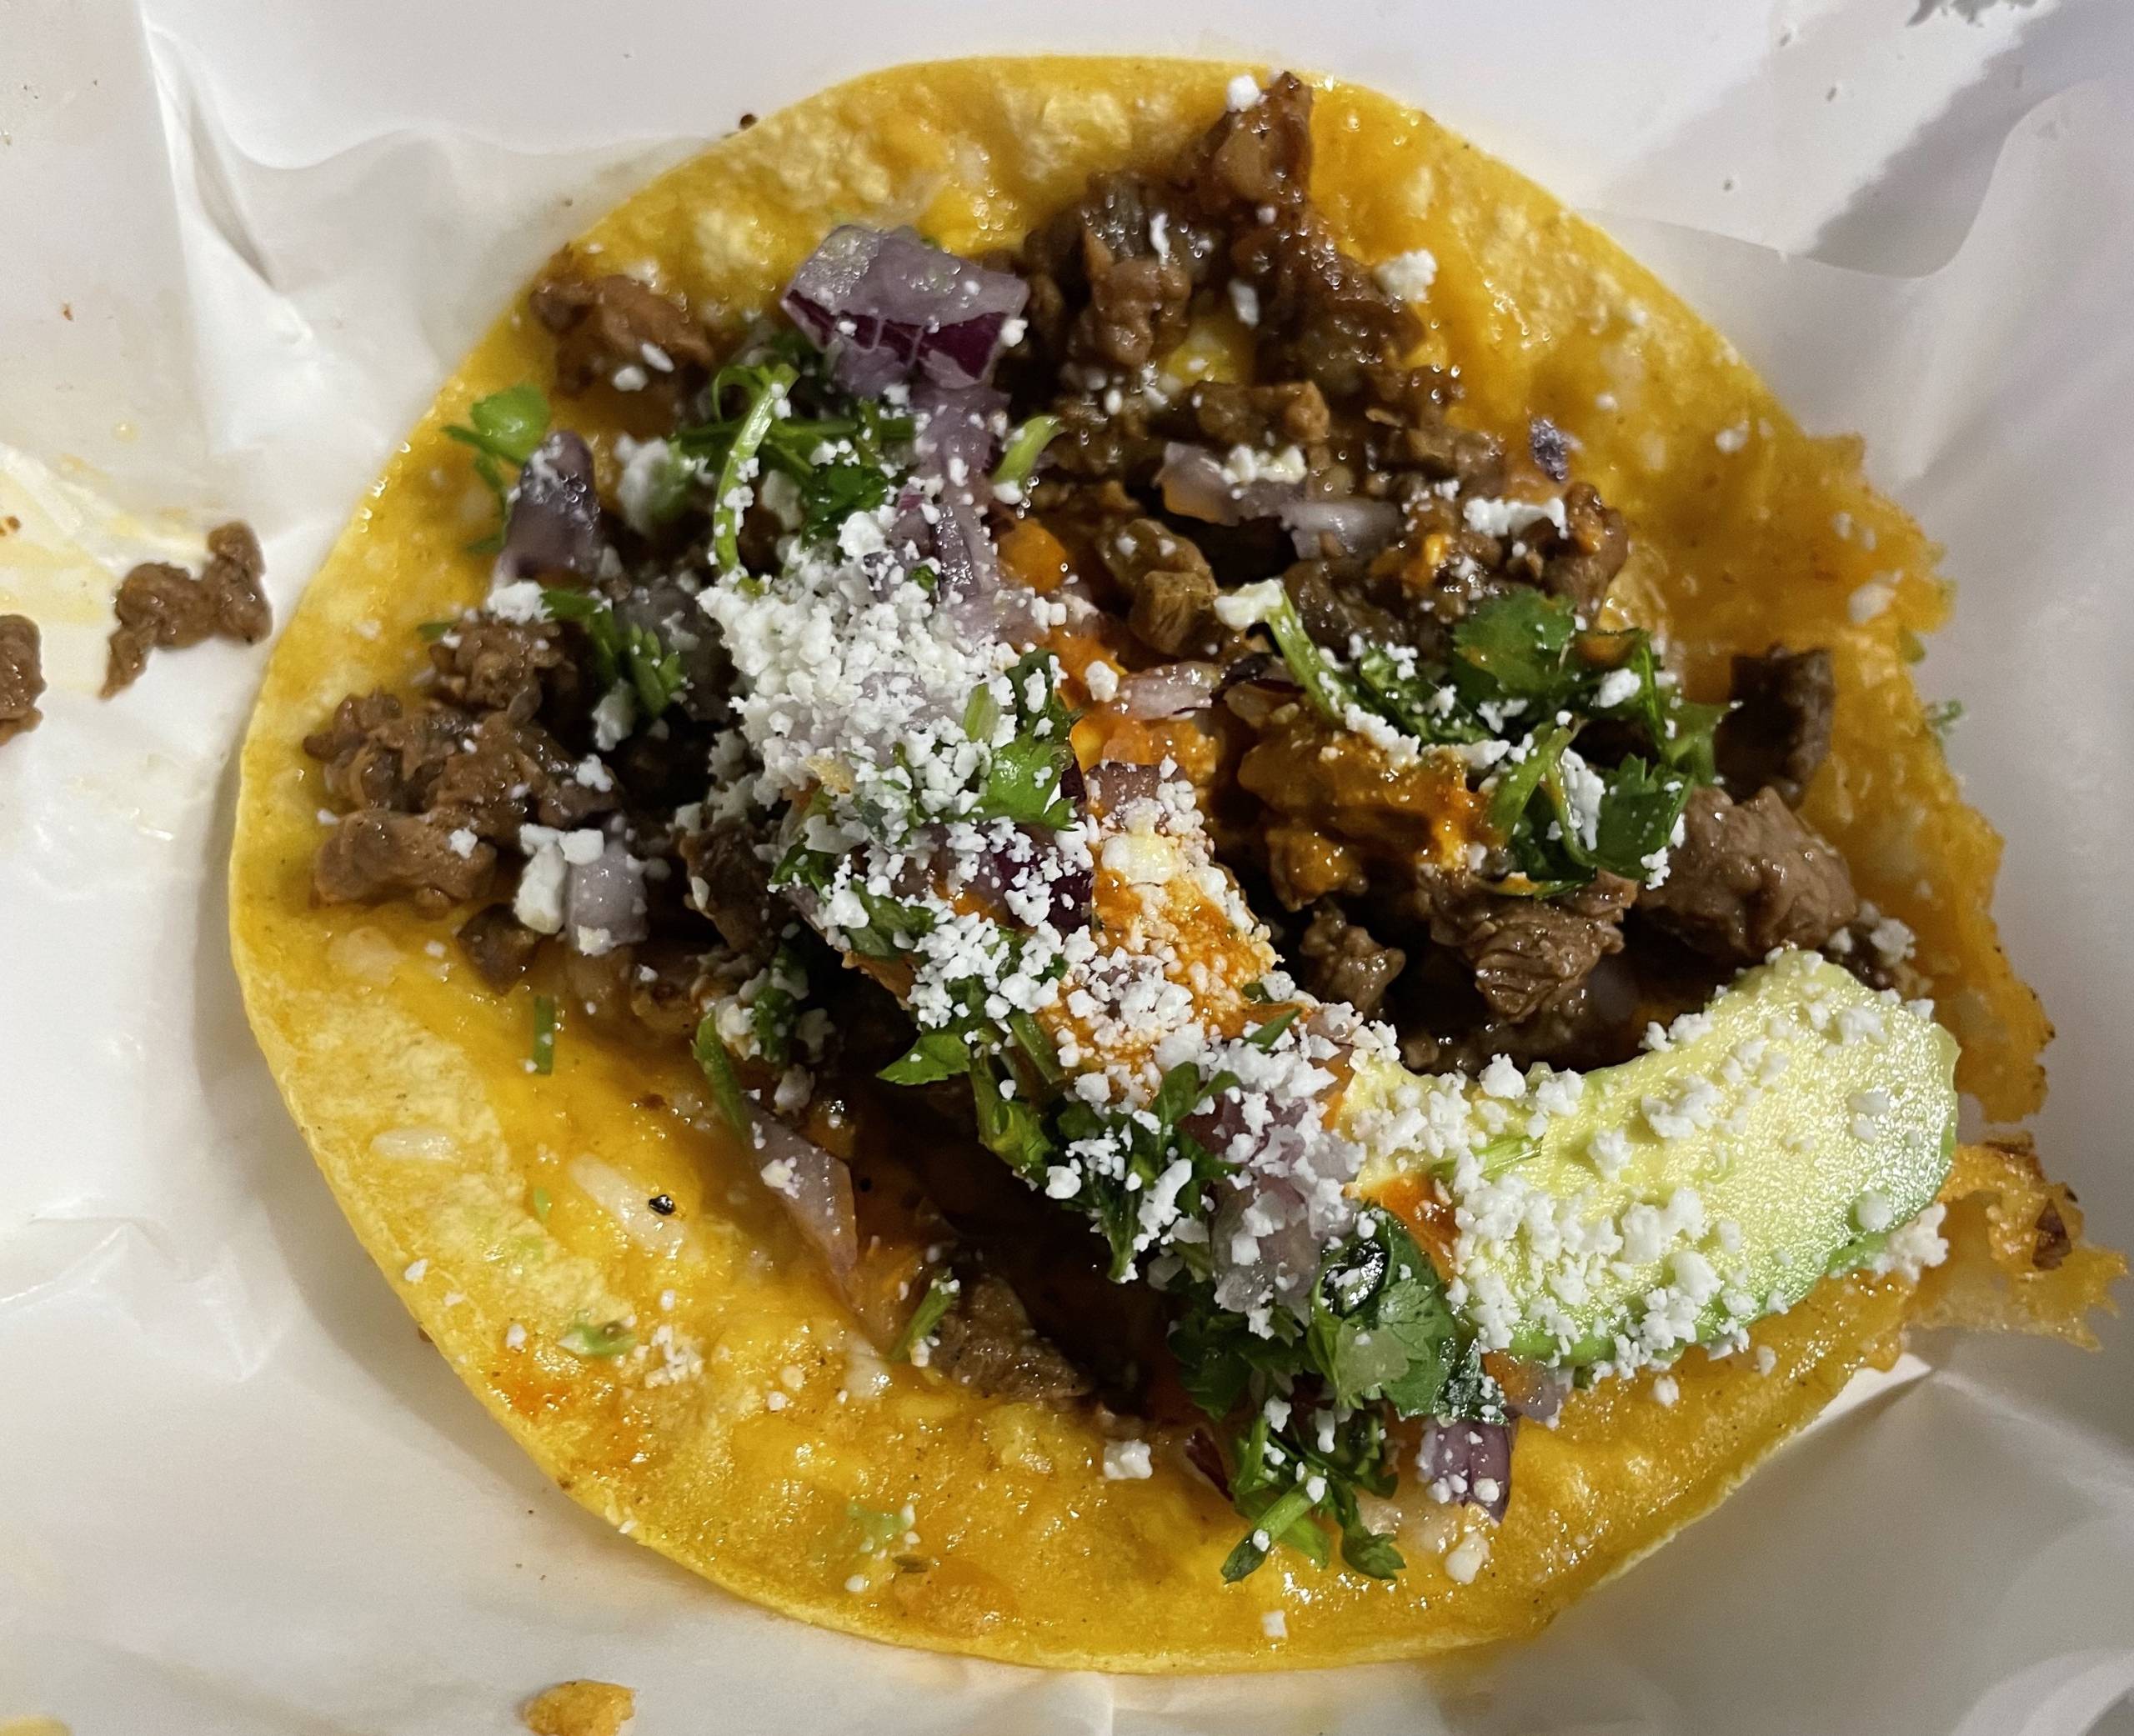 a carne asada taco with guacamole, cilantro and onions on a paper tray